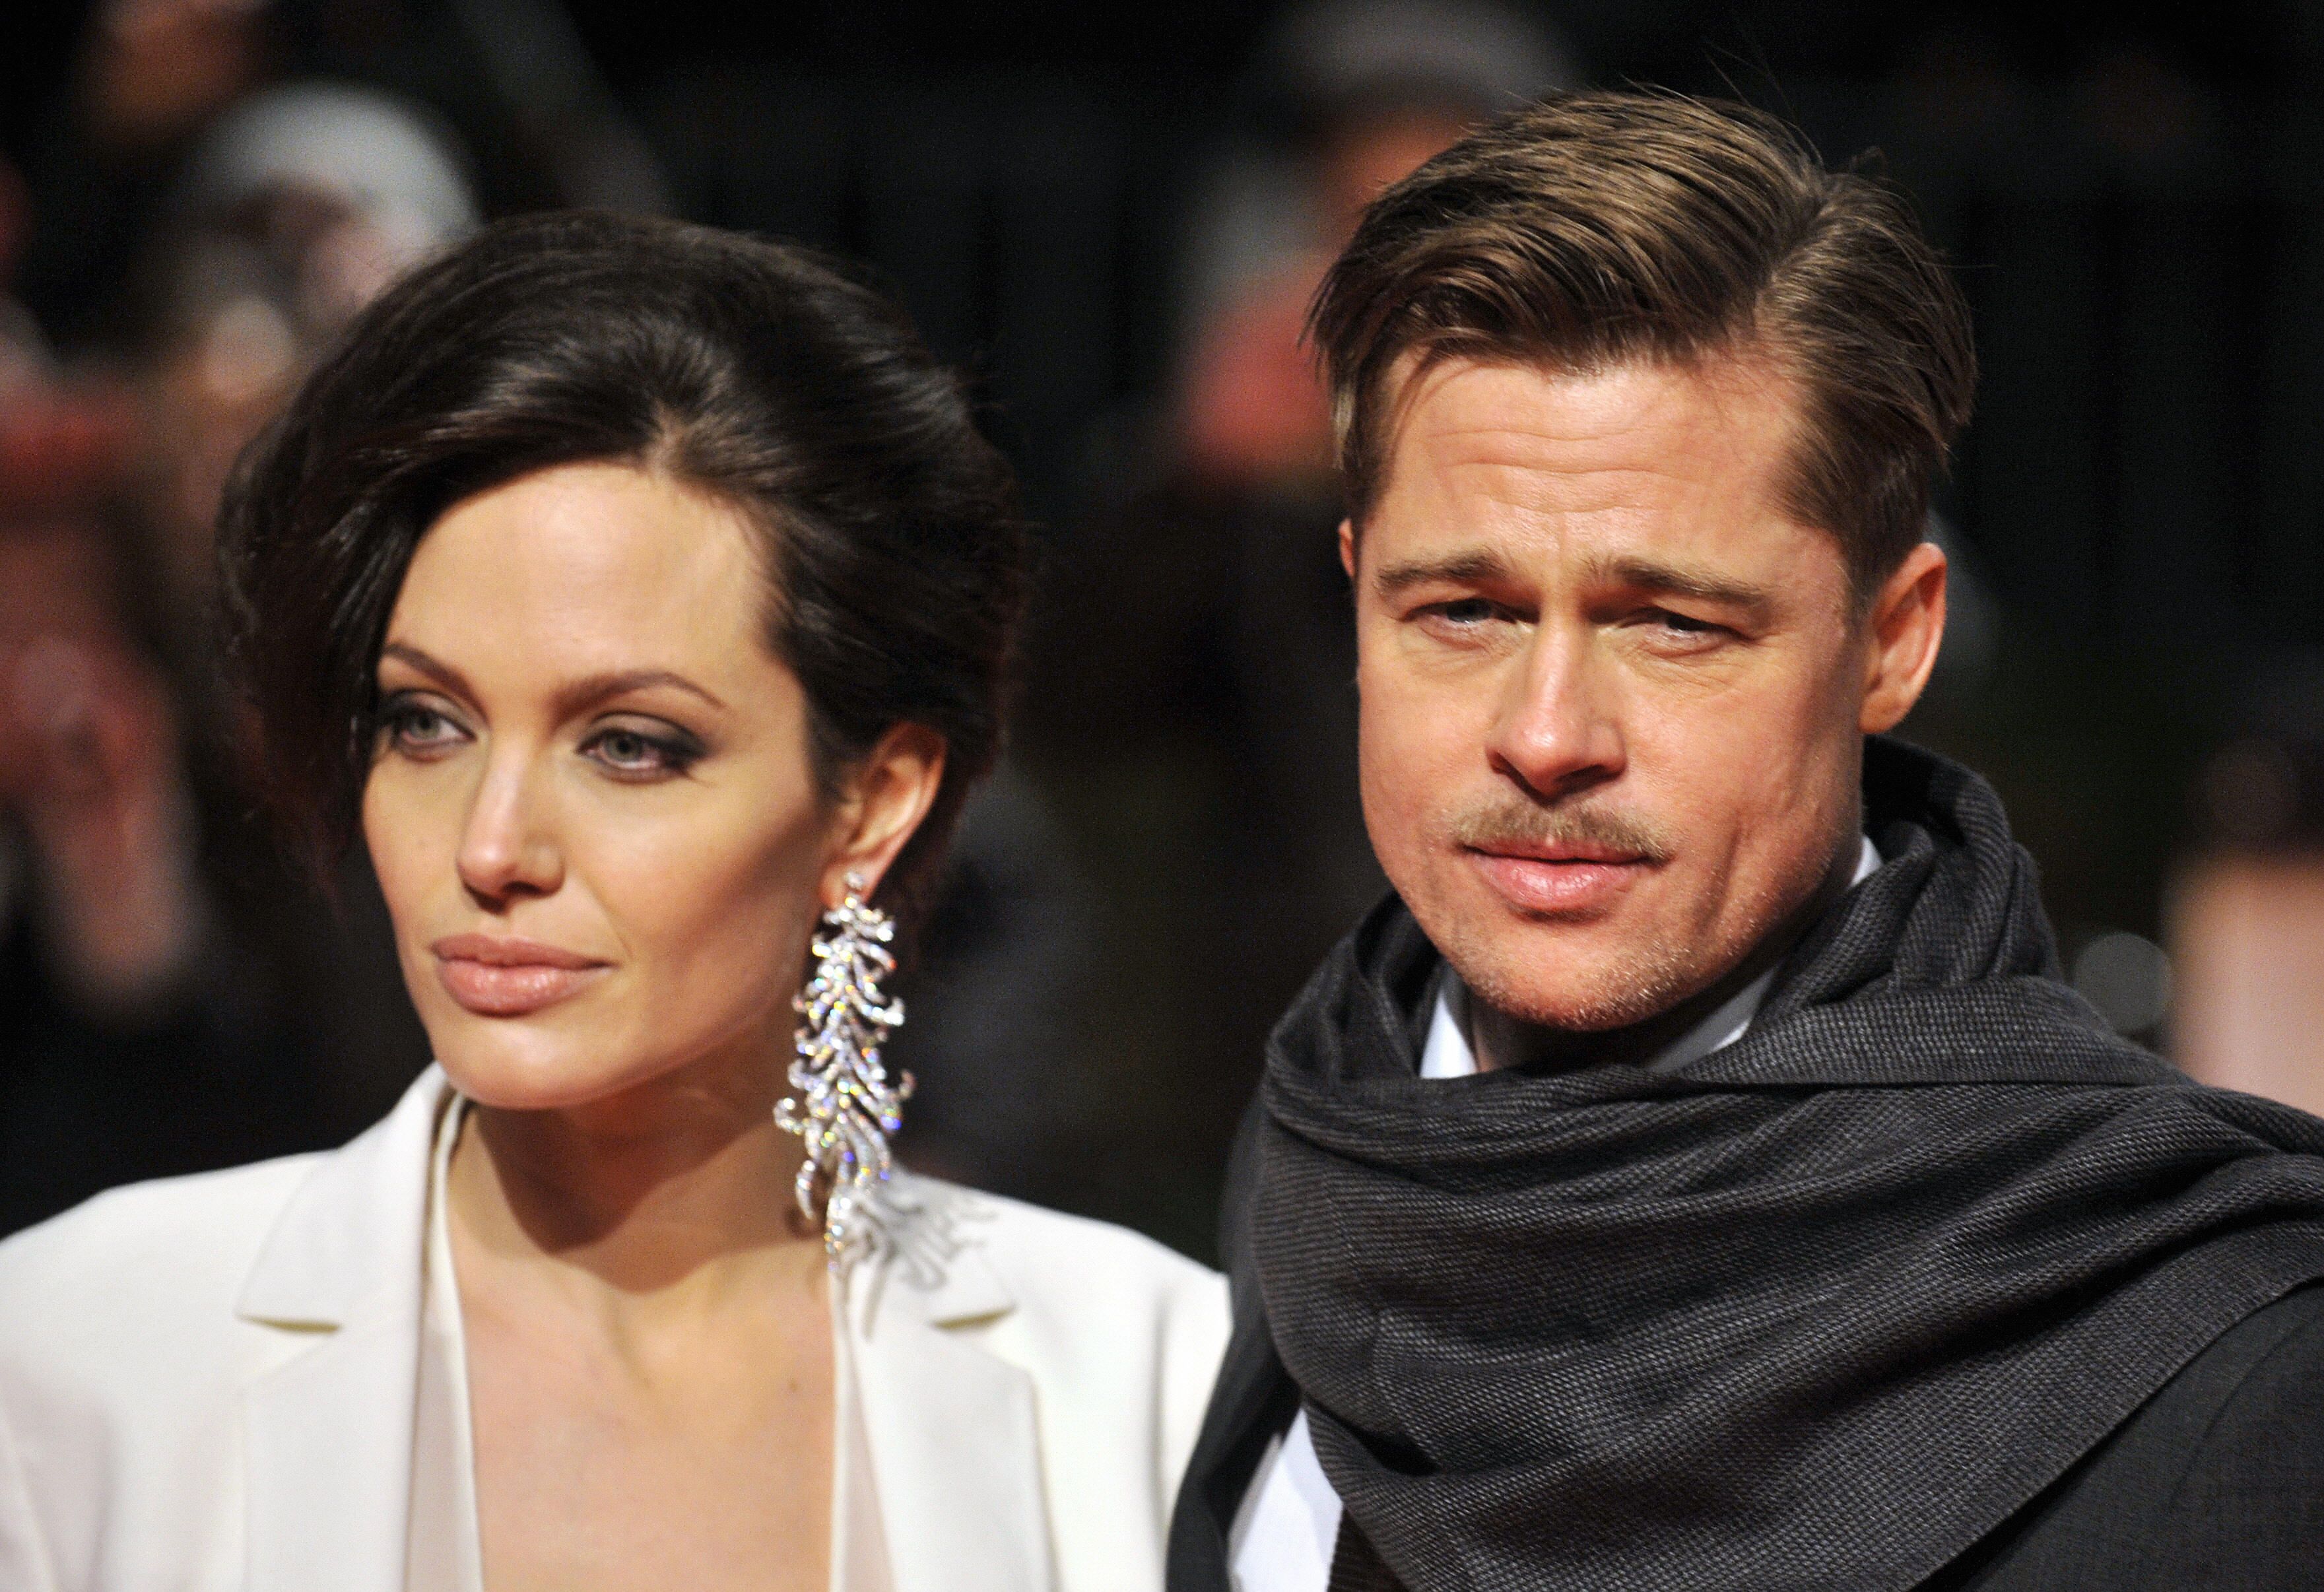 Brad Pitt shows off bizarre hairstyle at Screen Actors Guild Awards |  Herald Sun